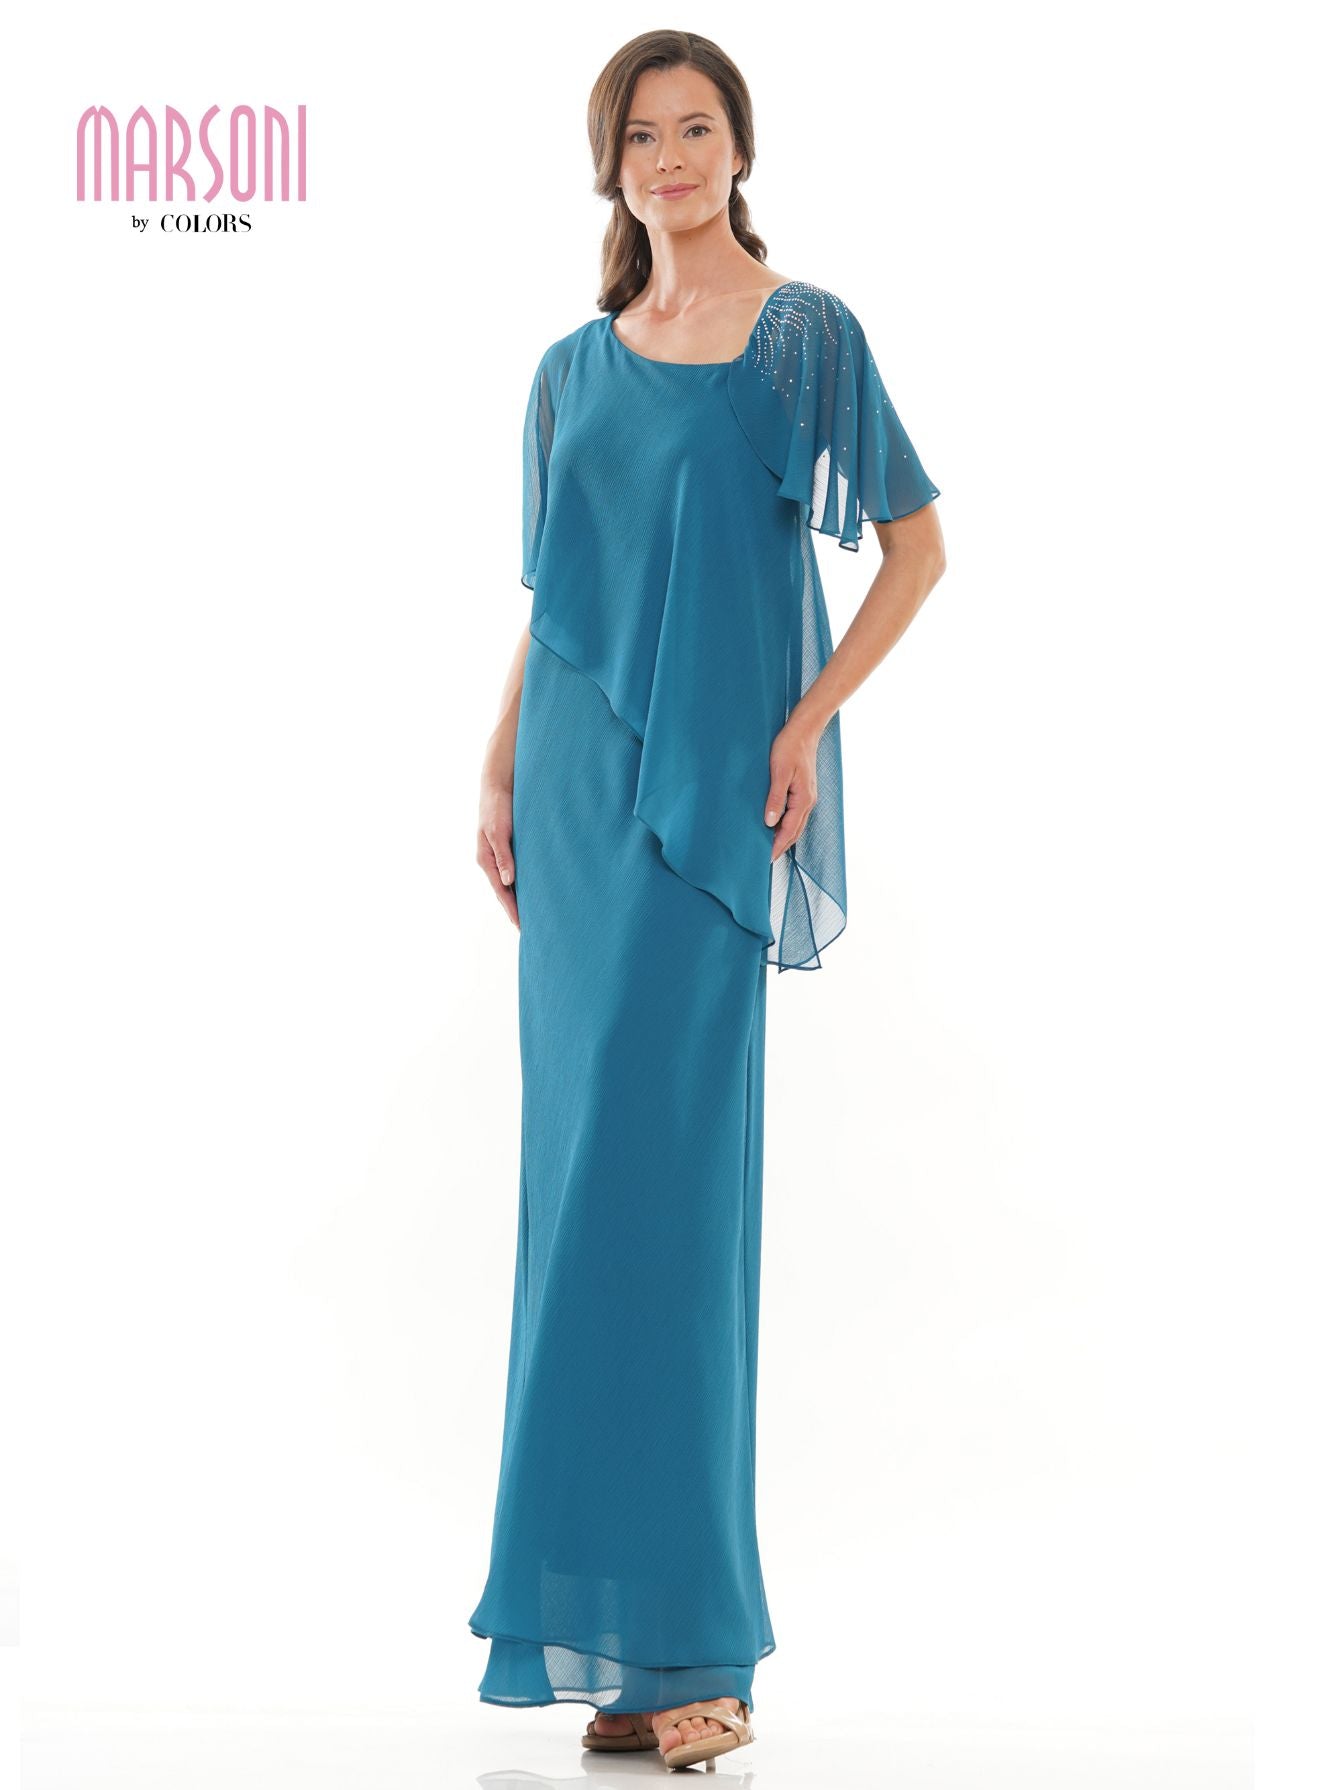 Welcome to WWW.SWANDRESSES.COM, your destination for authentic designer dresses. Discover our Elegant Maxi, Classic Cocktail, Sophisticated Sheath, Glamorous Mermaid, Timeless A-Line, Romantic Lace, Off-the-Shoulder, and High-Low Dresses. Perfect for weddings, galas, proms, and special occasions. Elevate your style 